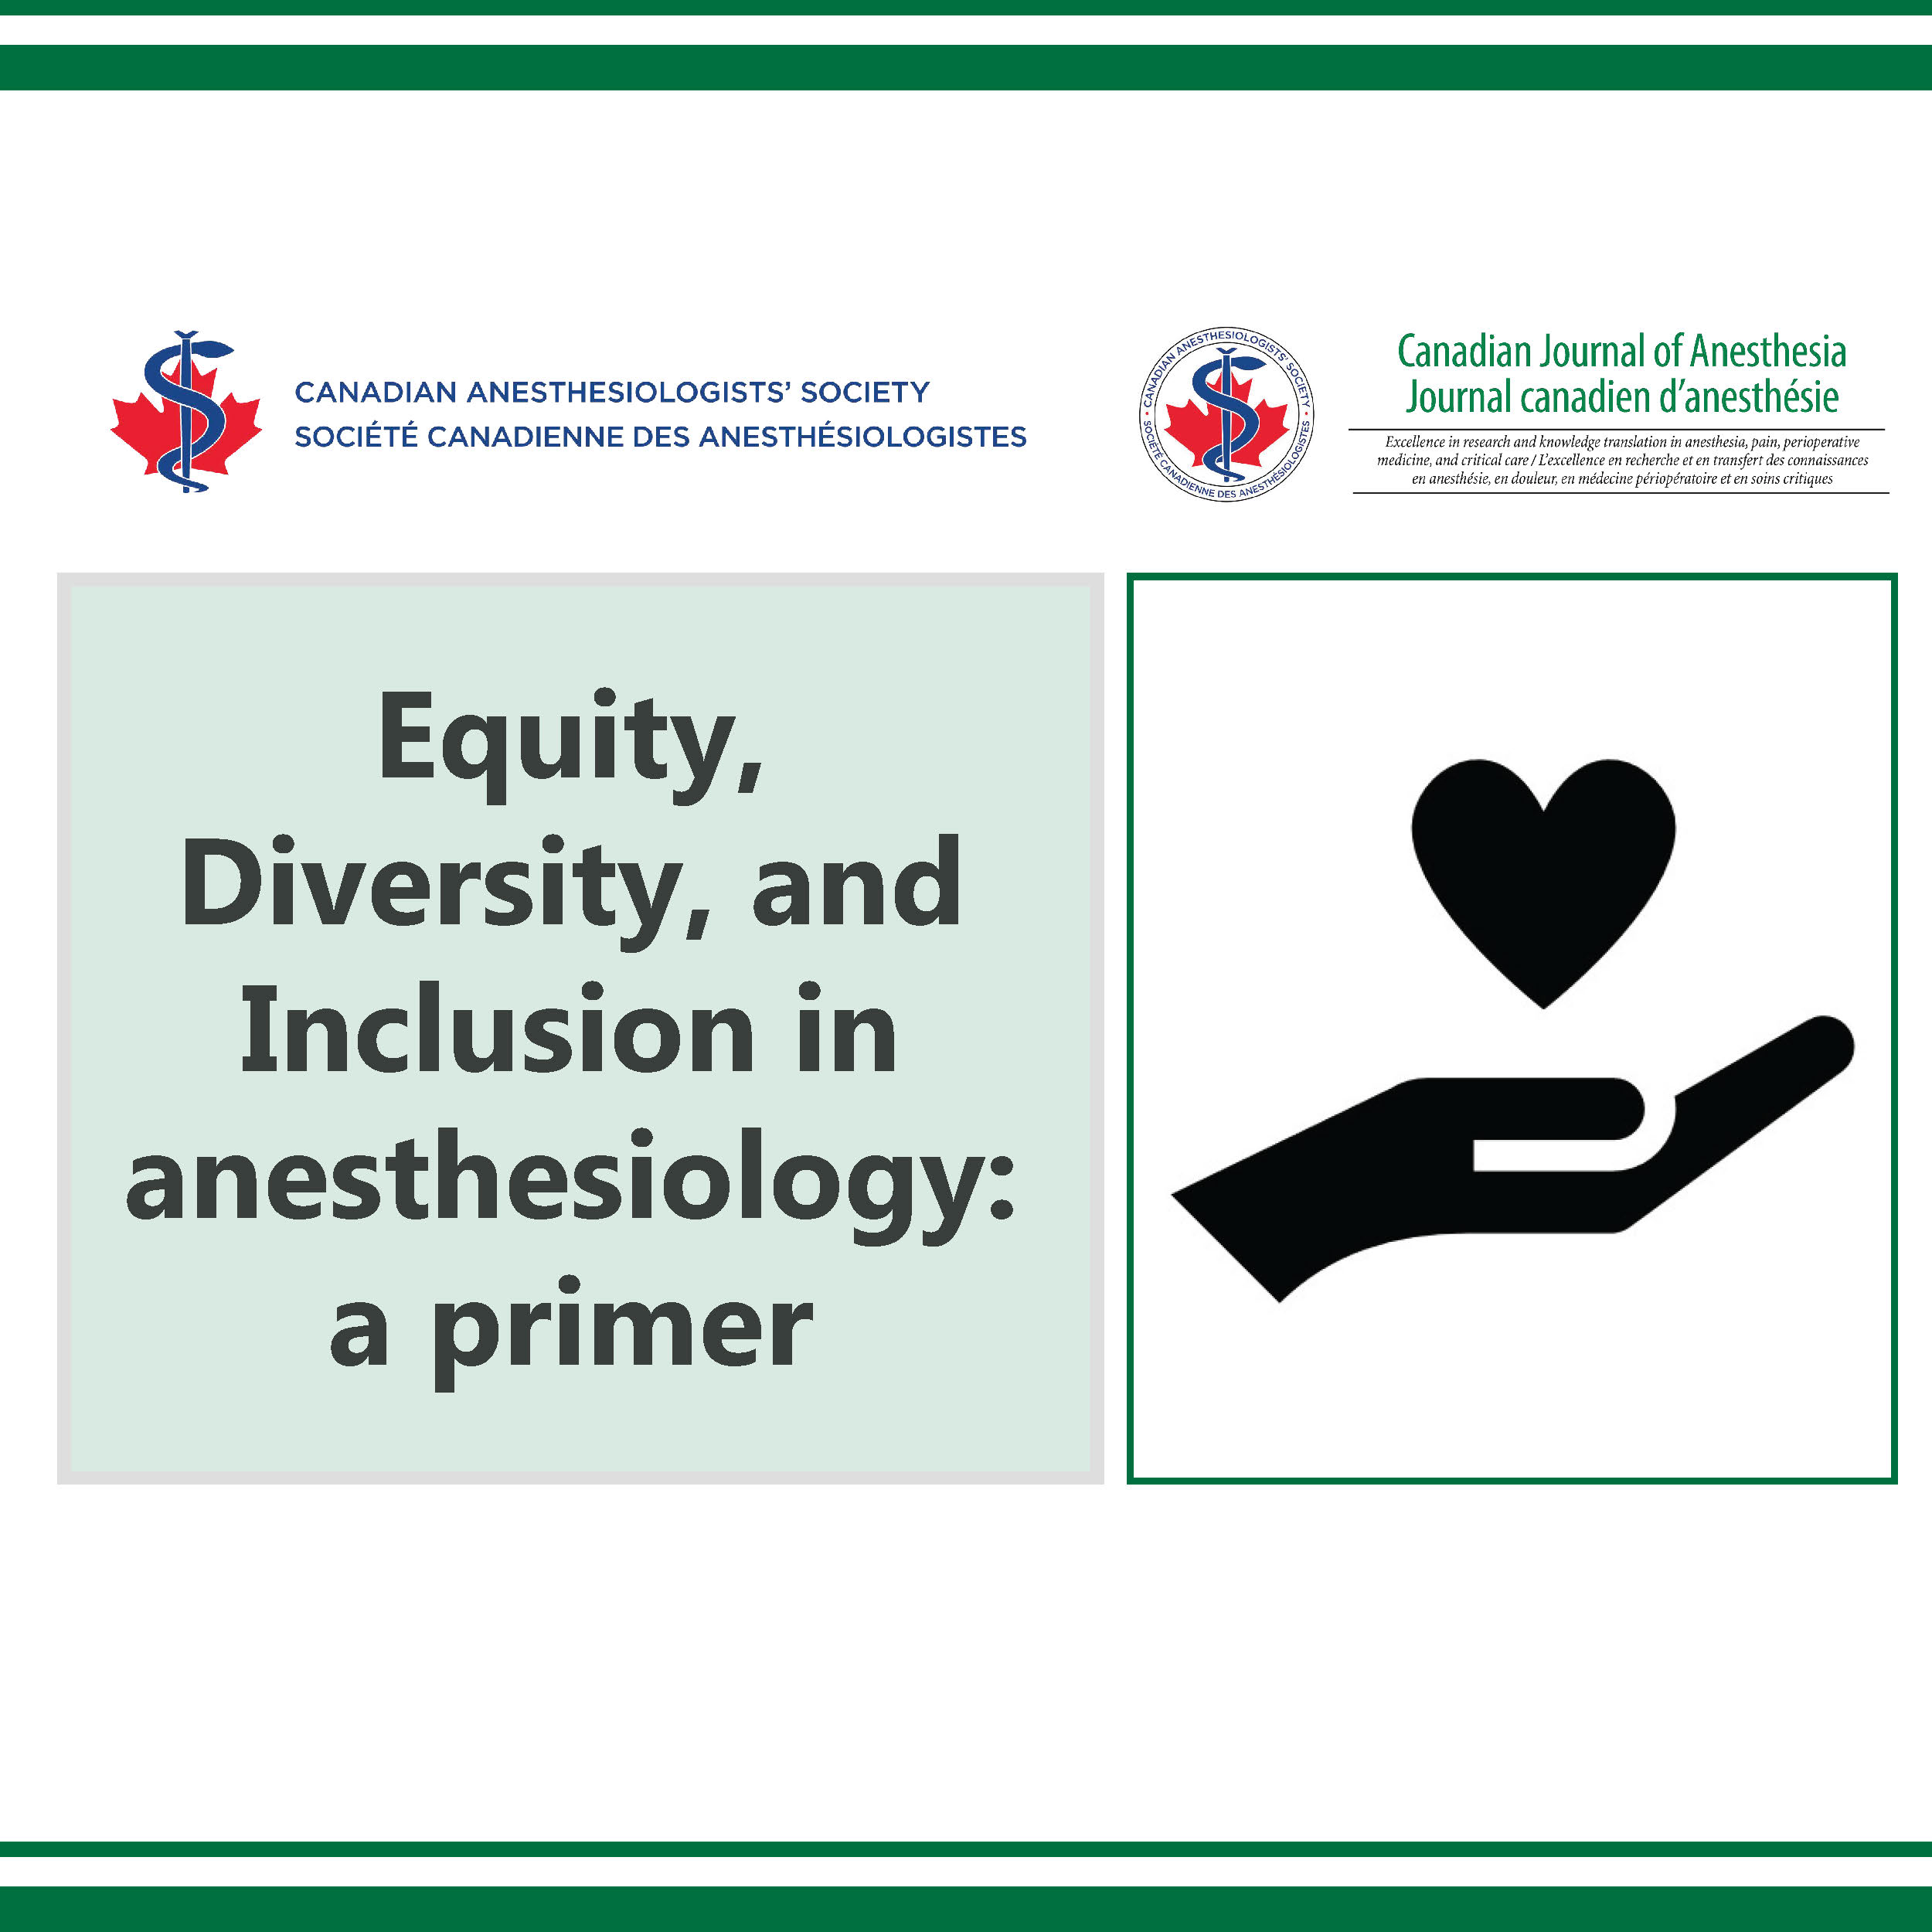 Equity, Diversity, and Inclusion in anesthesiology: a primer 